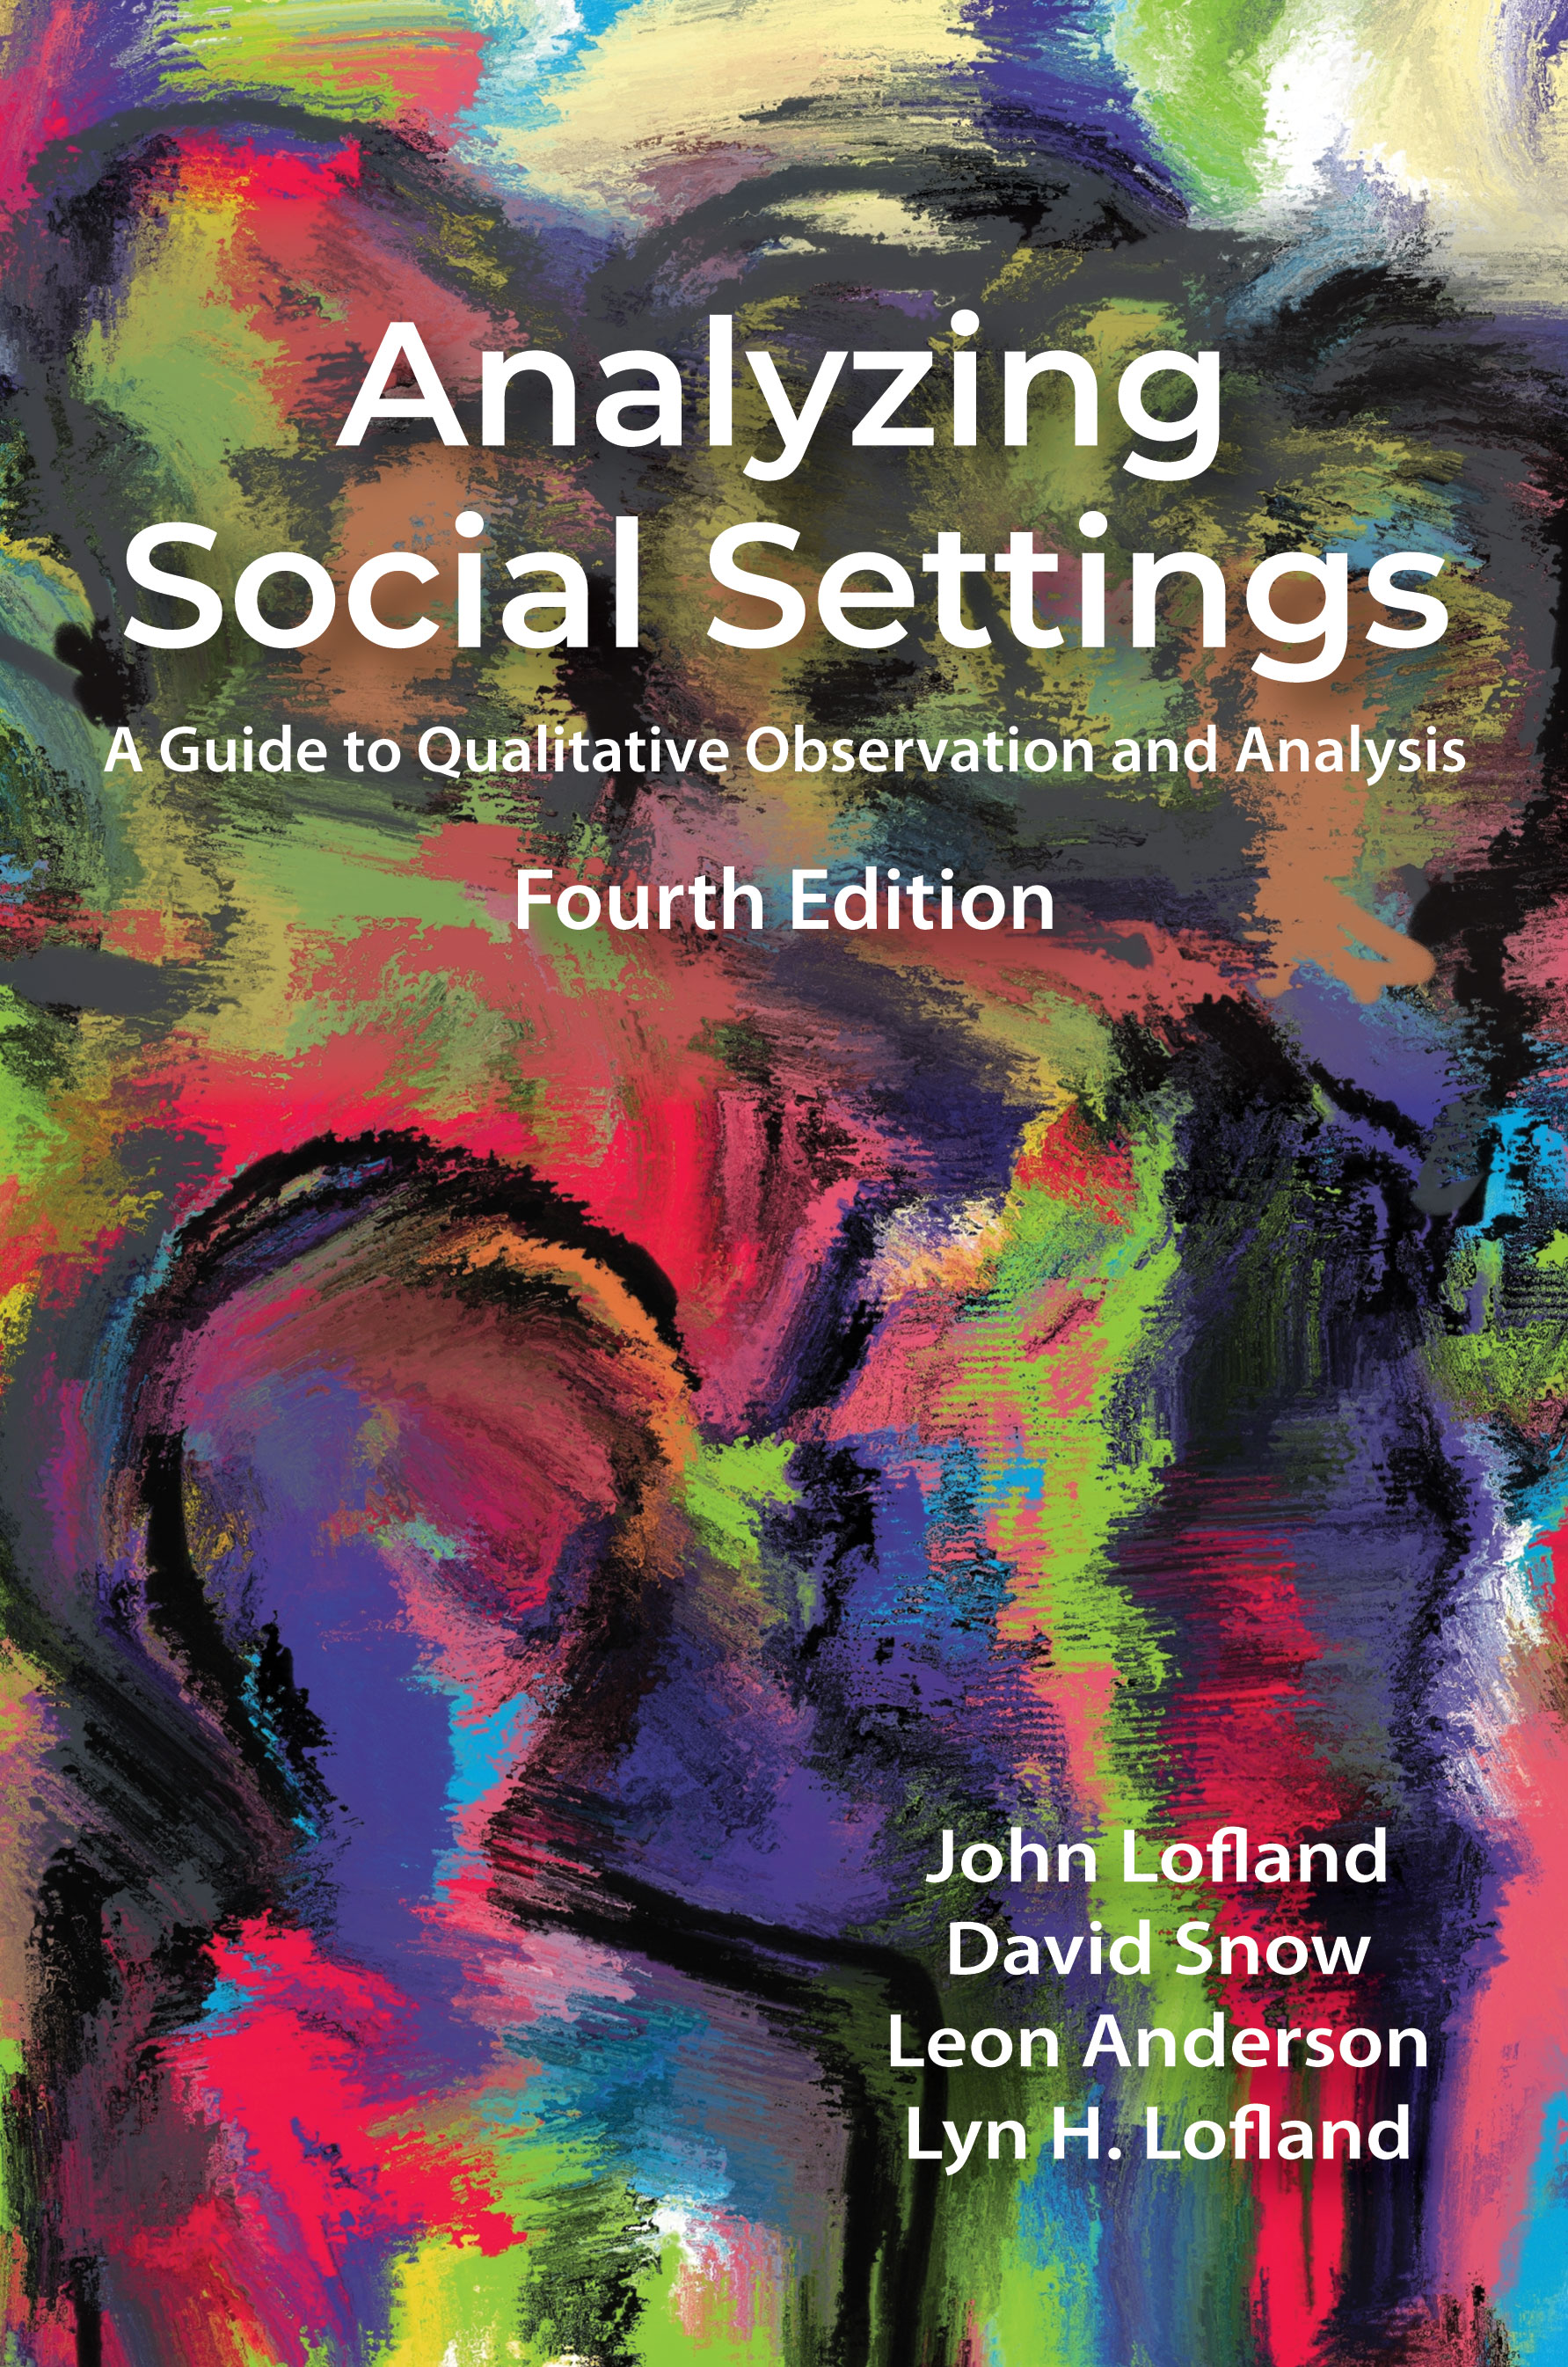 Analyzing Social Settings: A Guide to Qualitative Observation and Analysis, Fourth Edition by John  Lofland, David  Snow, Leon  Anderson, Lyn H. Lofland